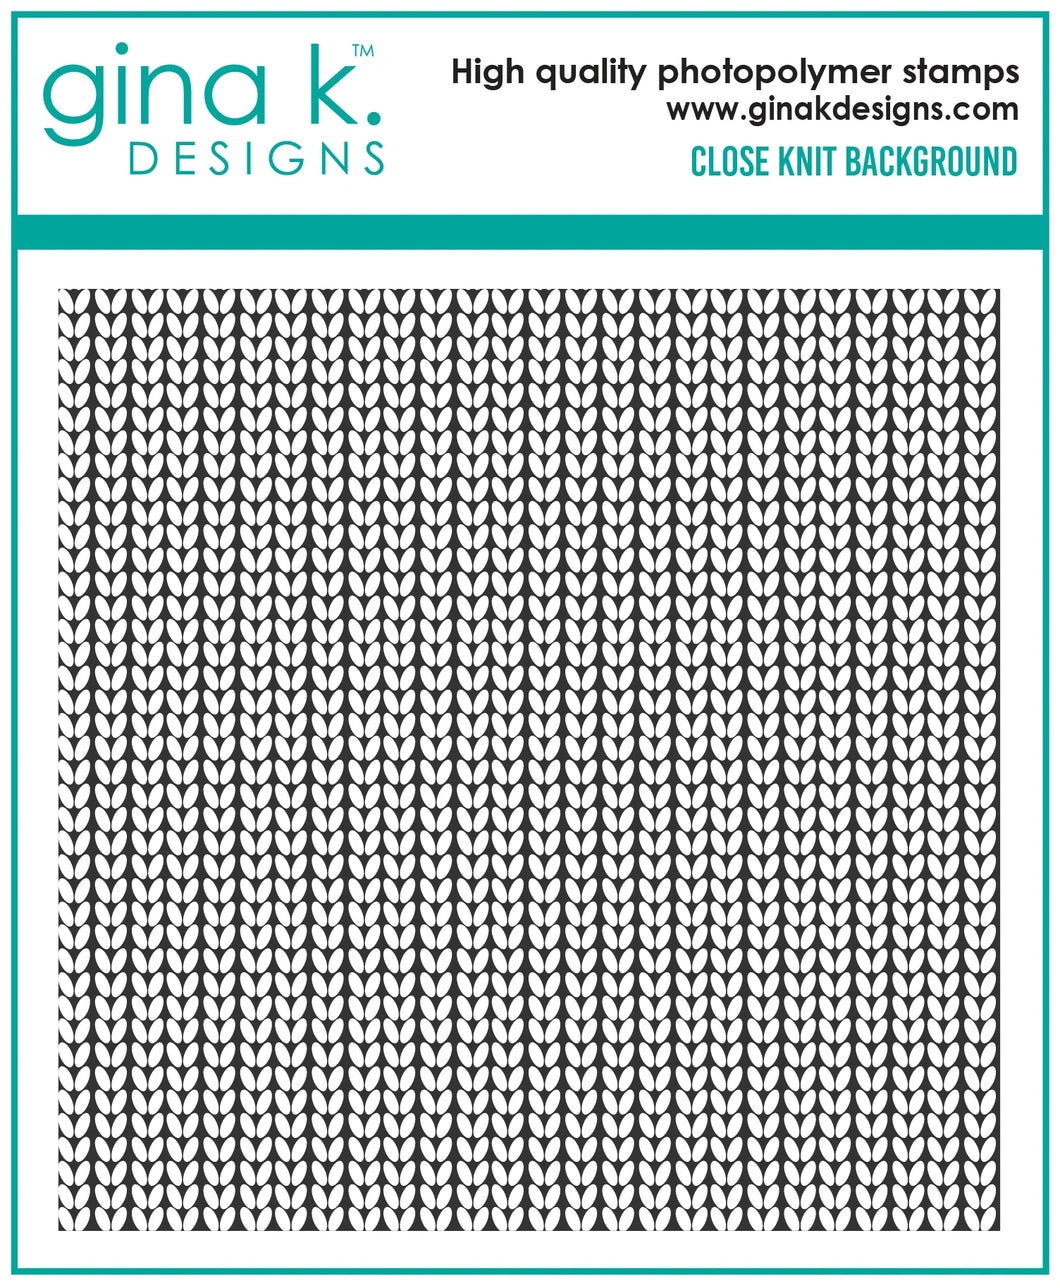 Gina K. Designs - Background Stamp - Close Knit. Close Knit Background Stamps is a stamp set by Gina K Designs. This set is made of premium clear photopolymer and measures 6